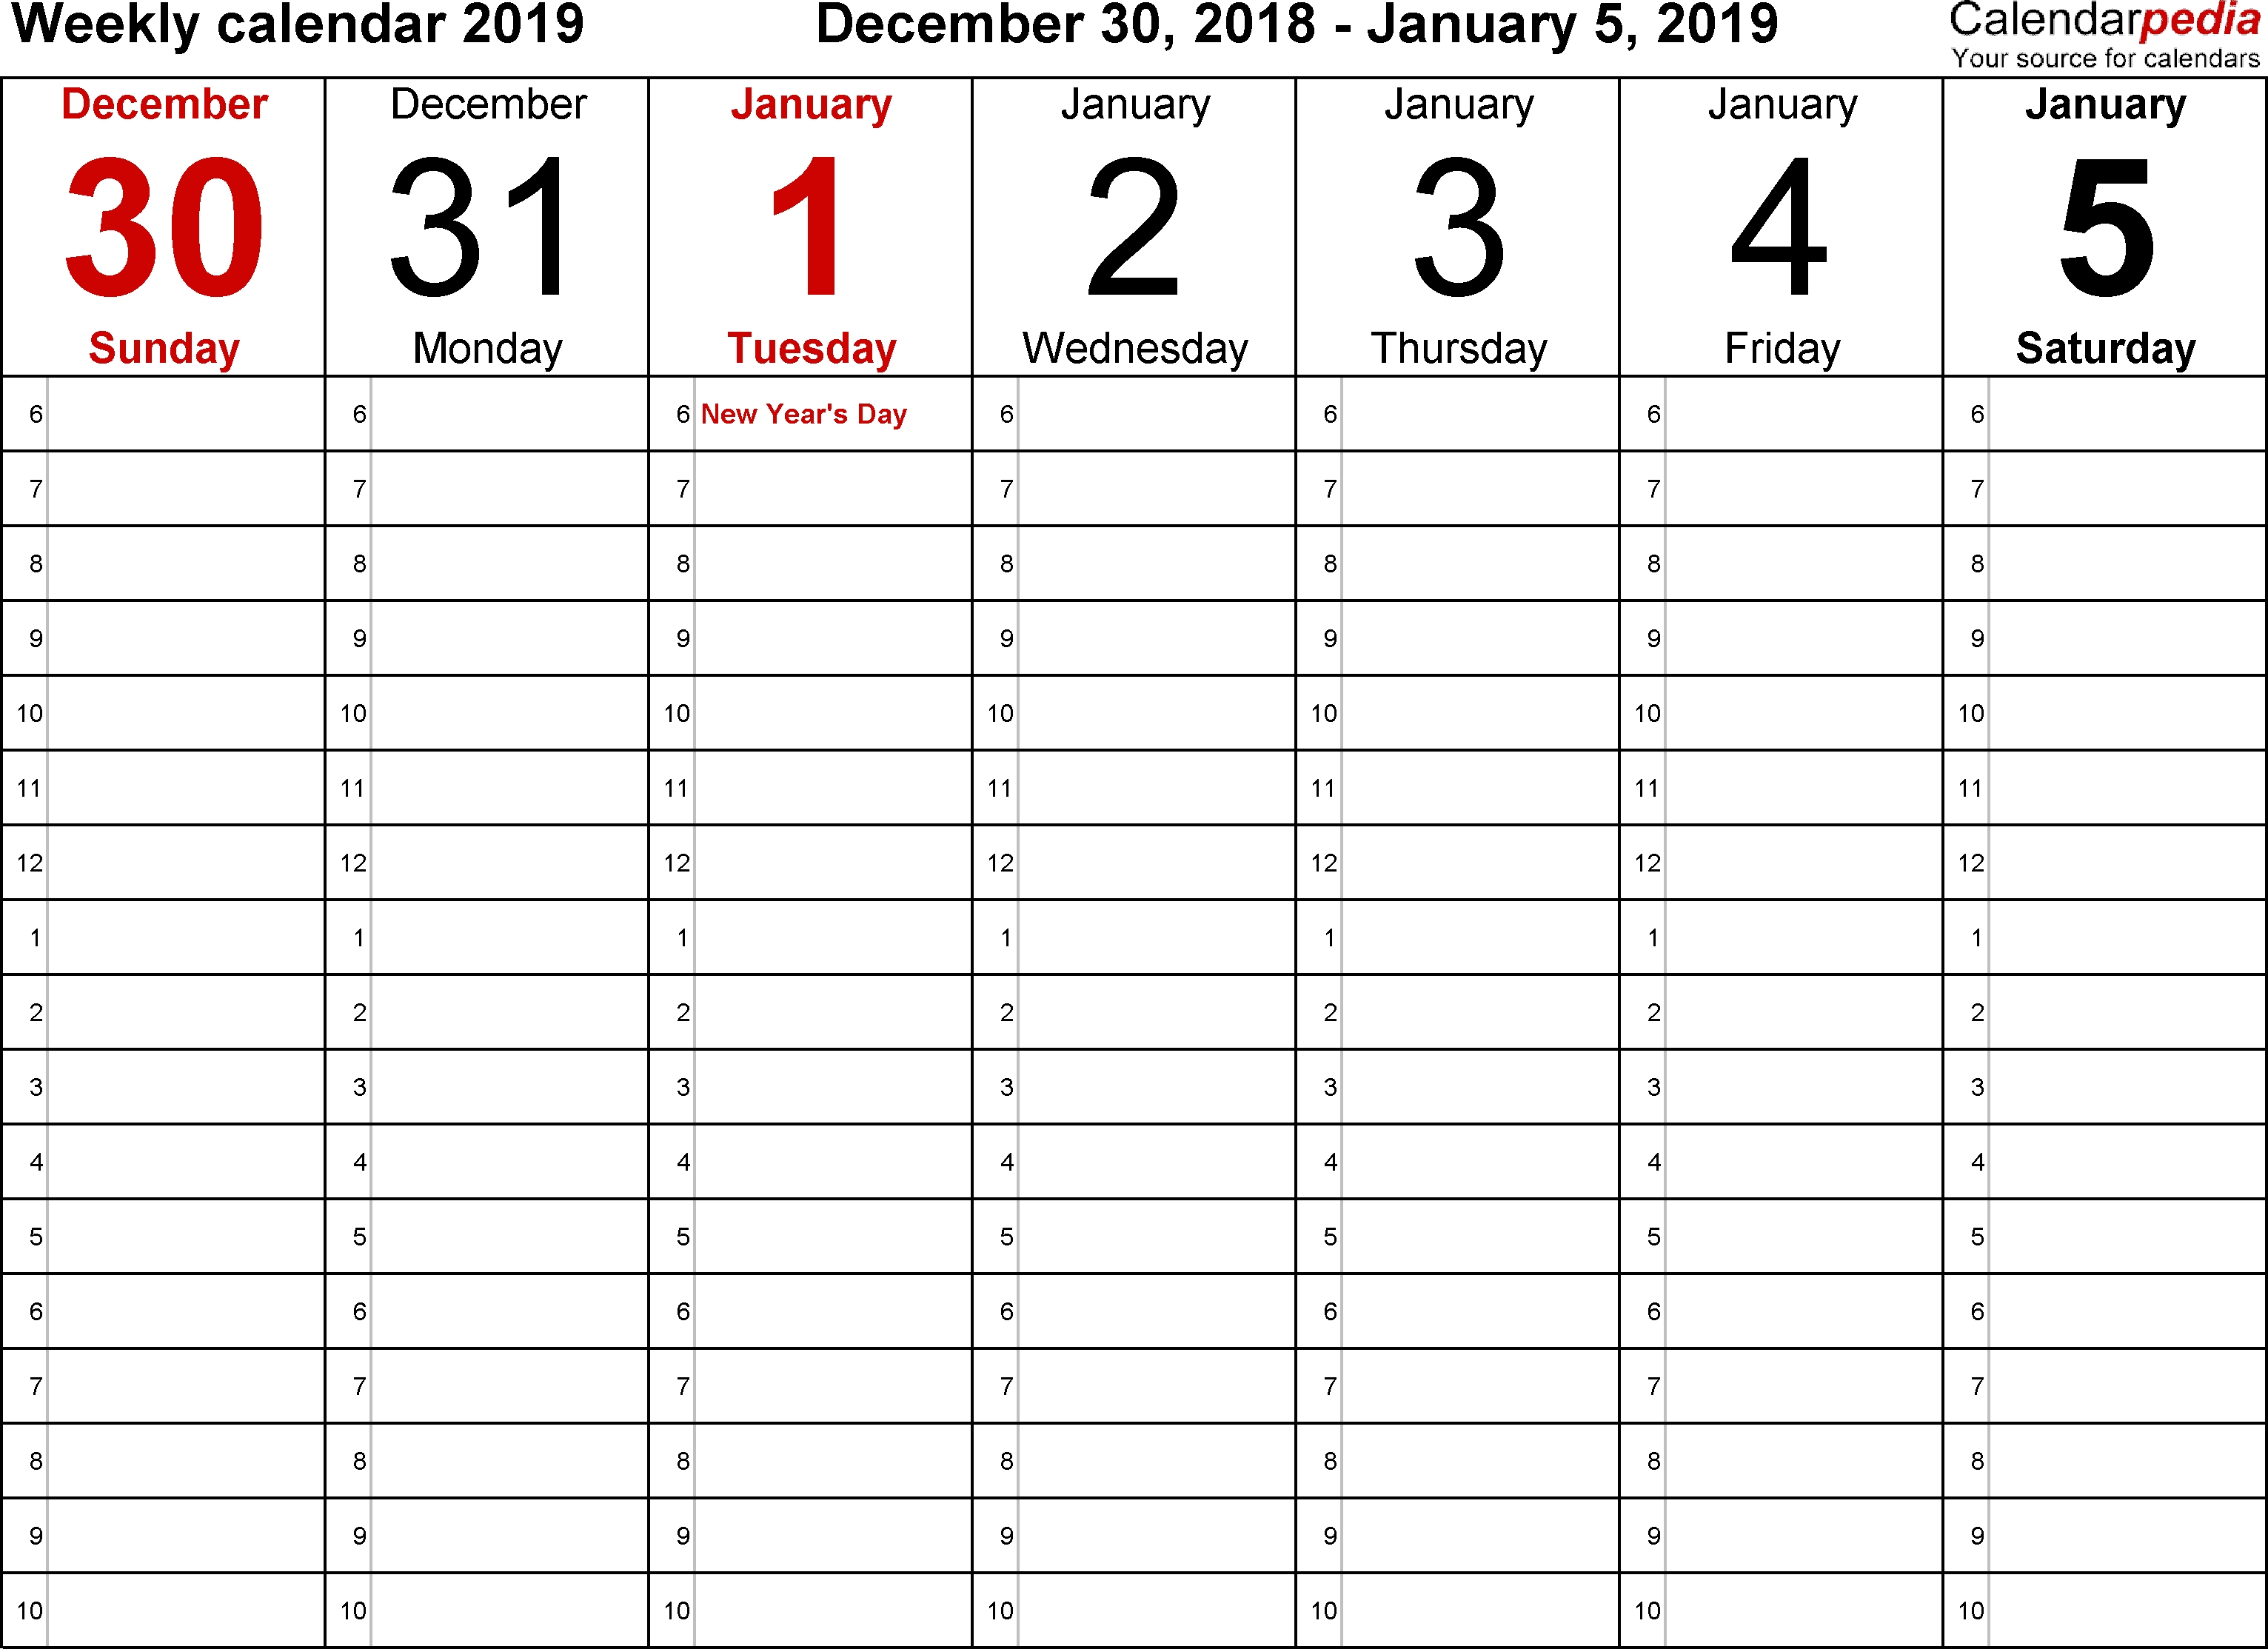 Weekly Calendar 2019 For Word - 12 Free Printable Templates inside Day And Time Calendar Template